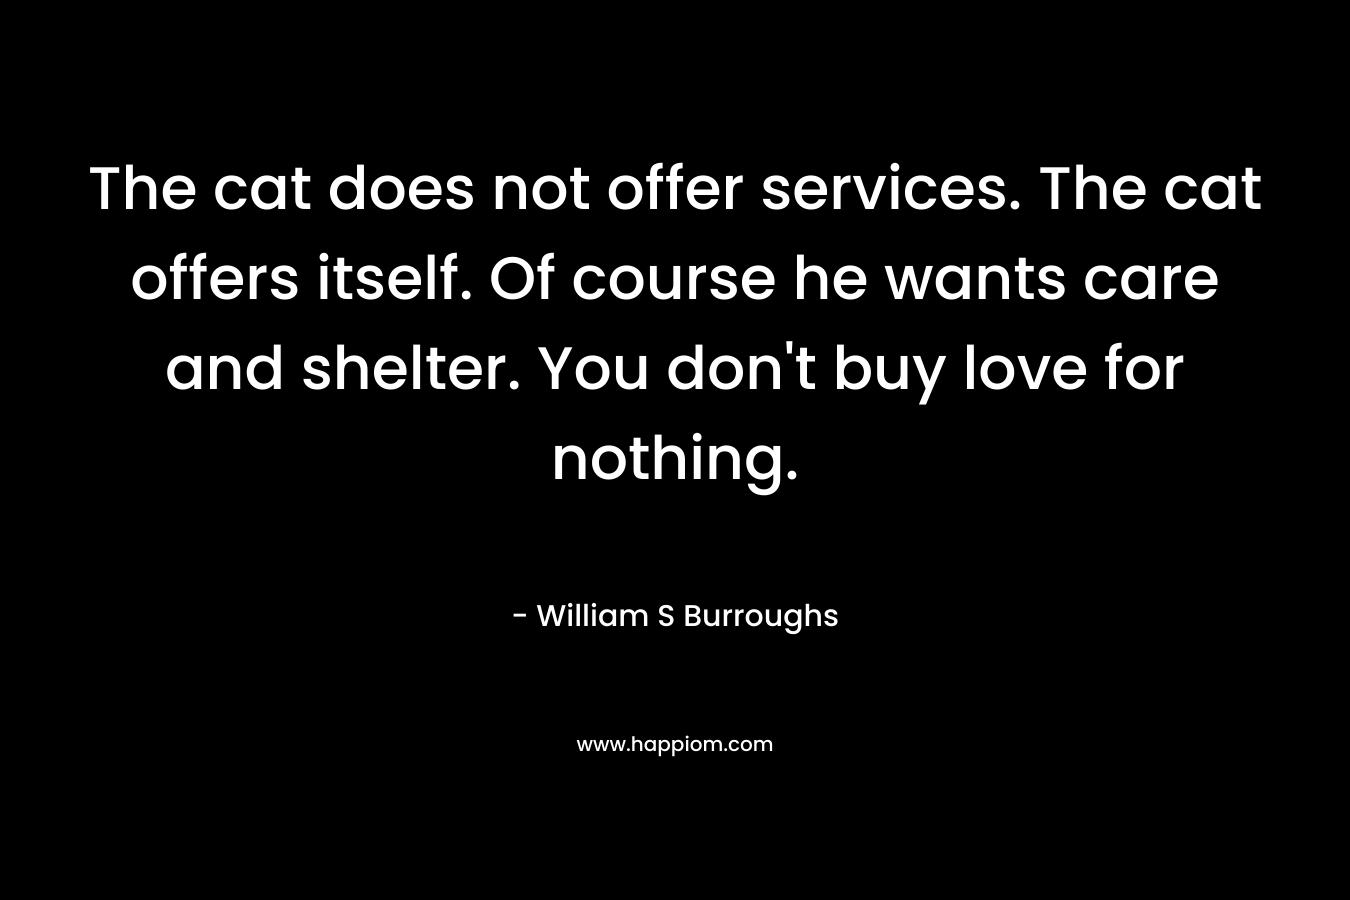 The cat does not offer services. The cat offers itself. Of course he wants care and shelter. You don't buy love for nothing.